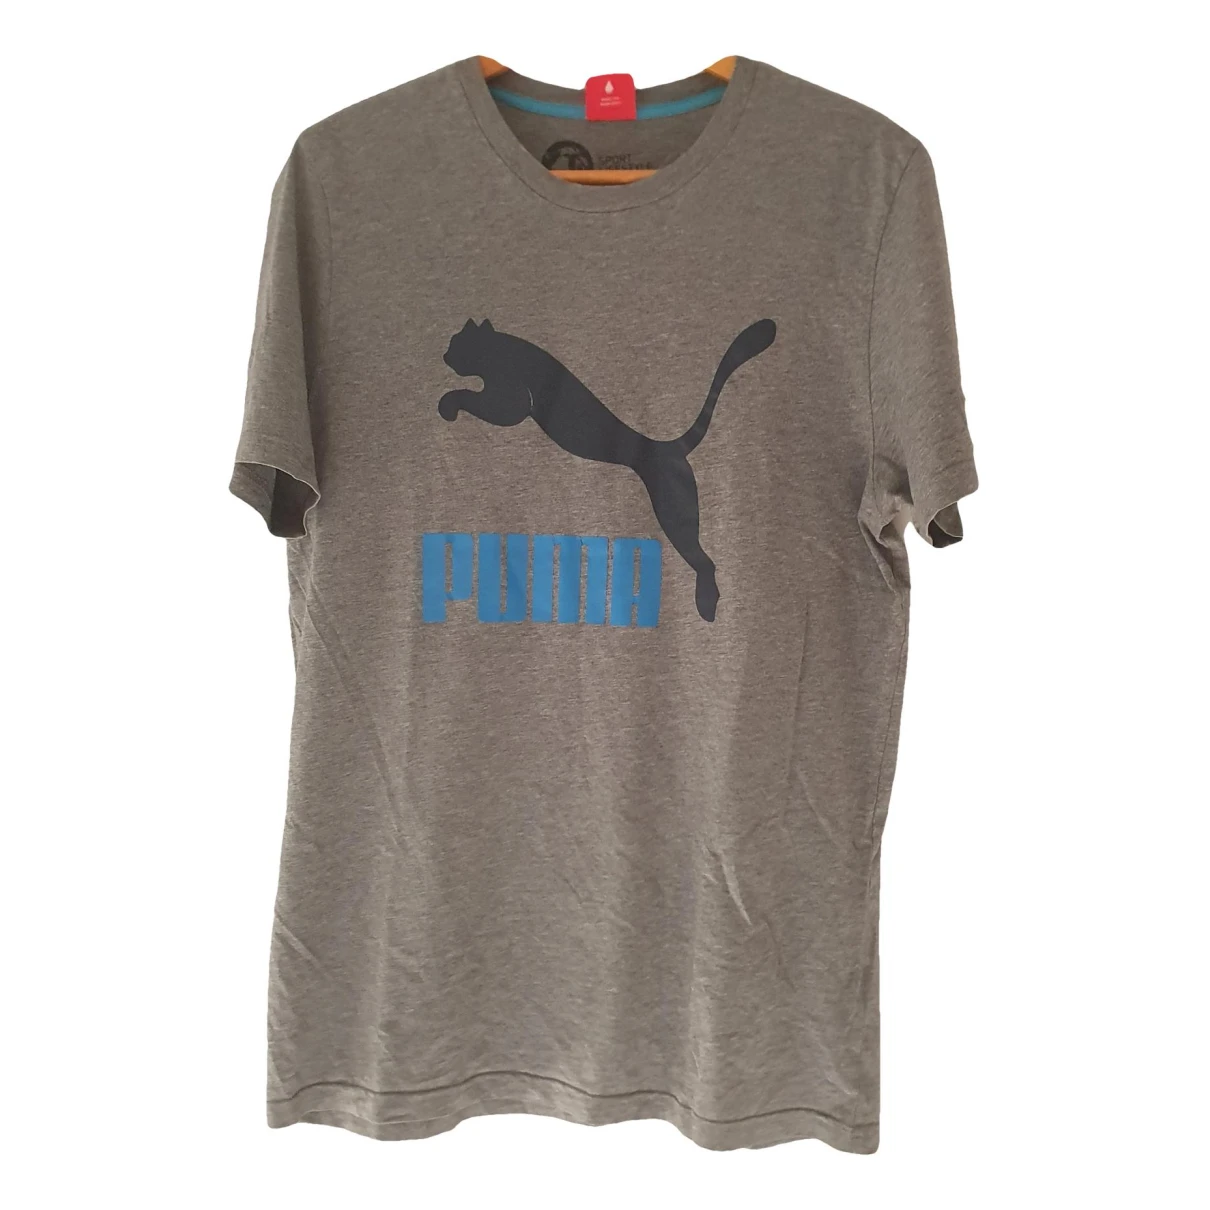 Pre-owned Puma T-shirt In Grey